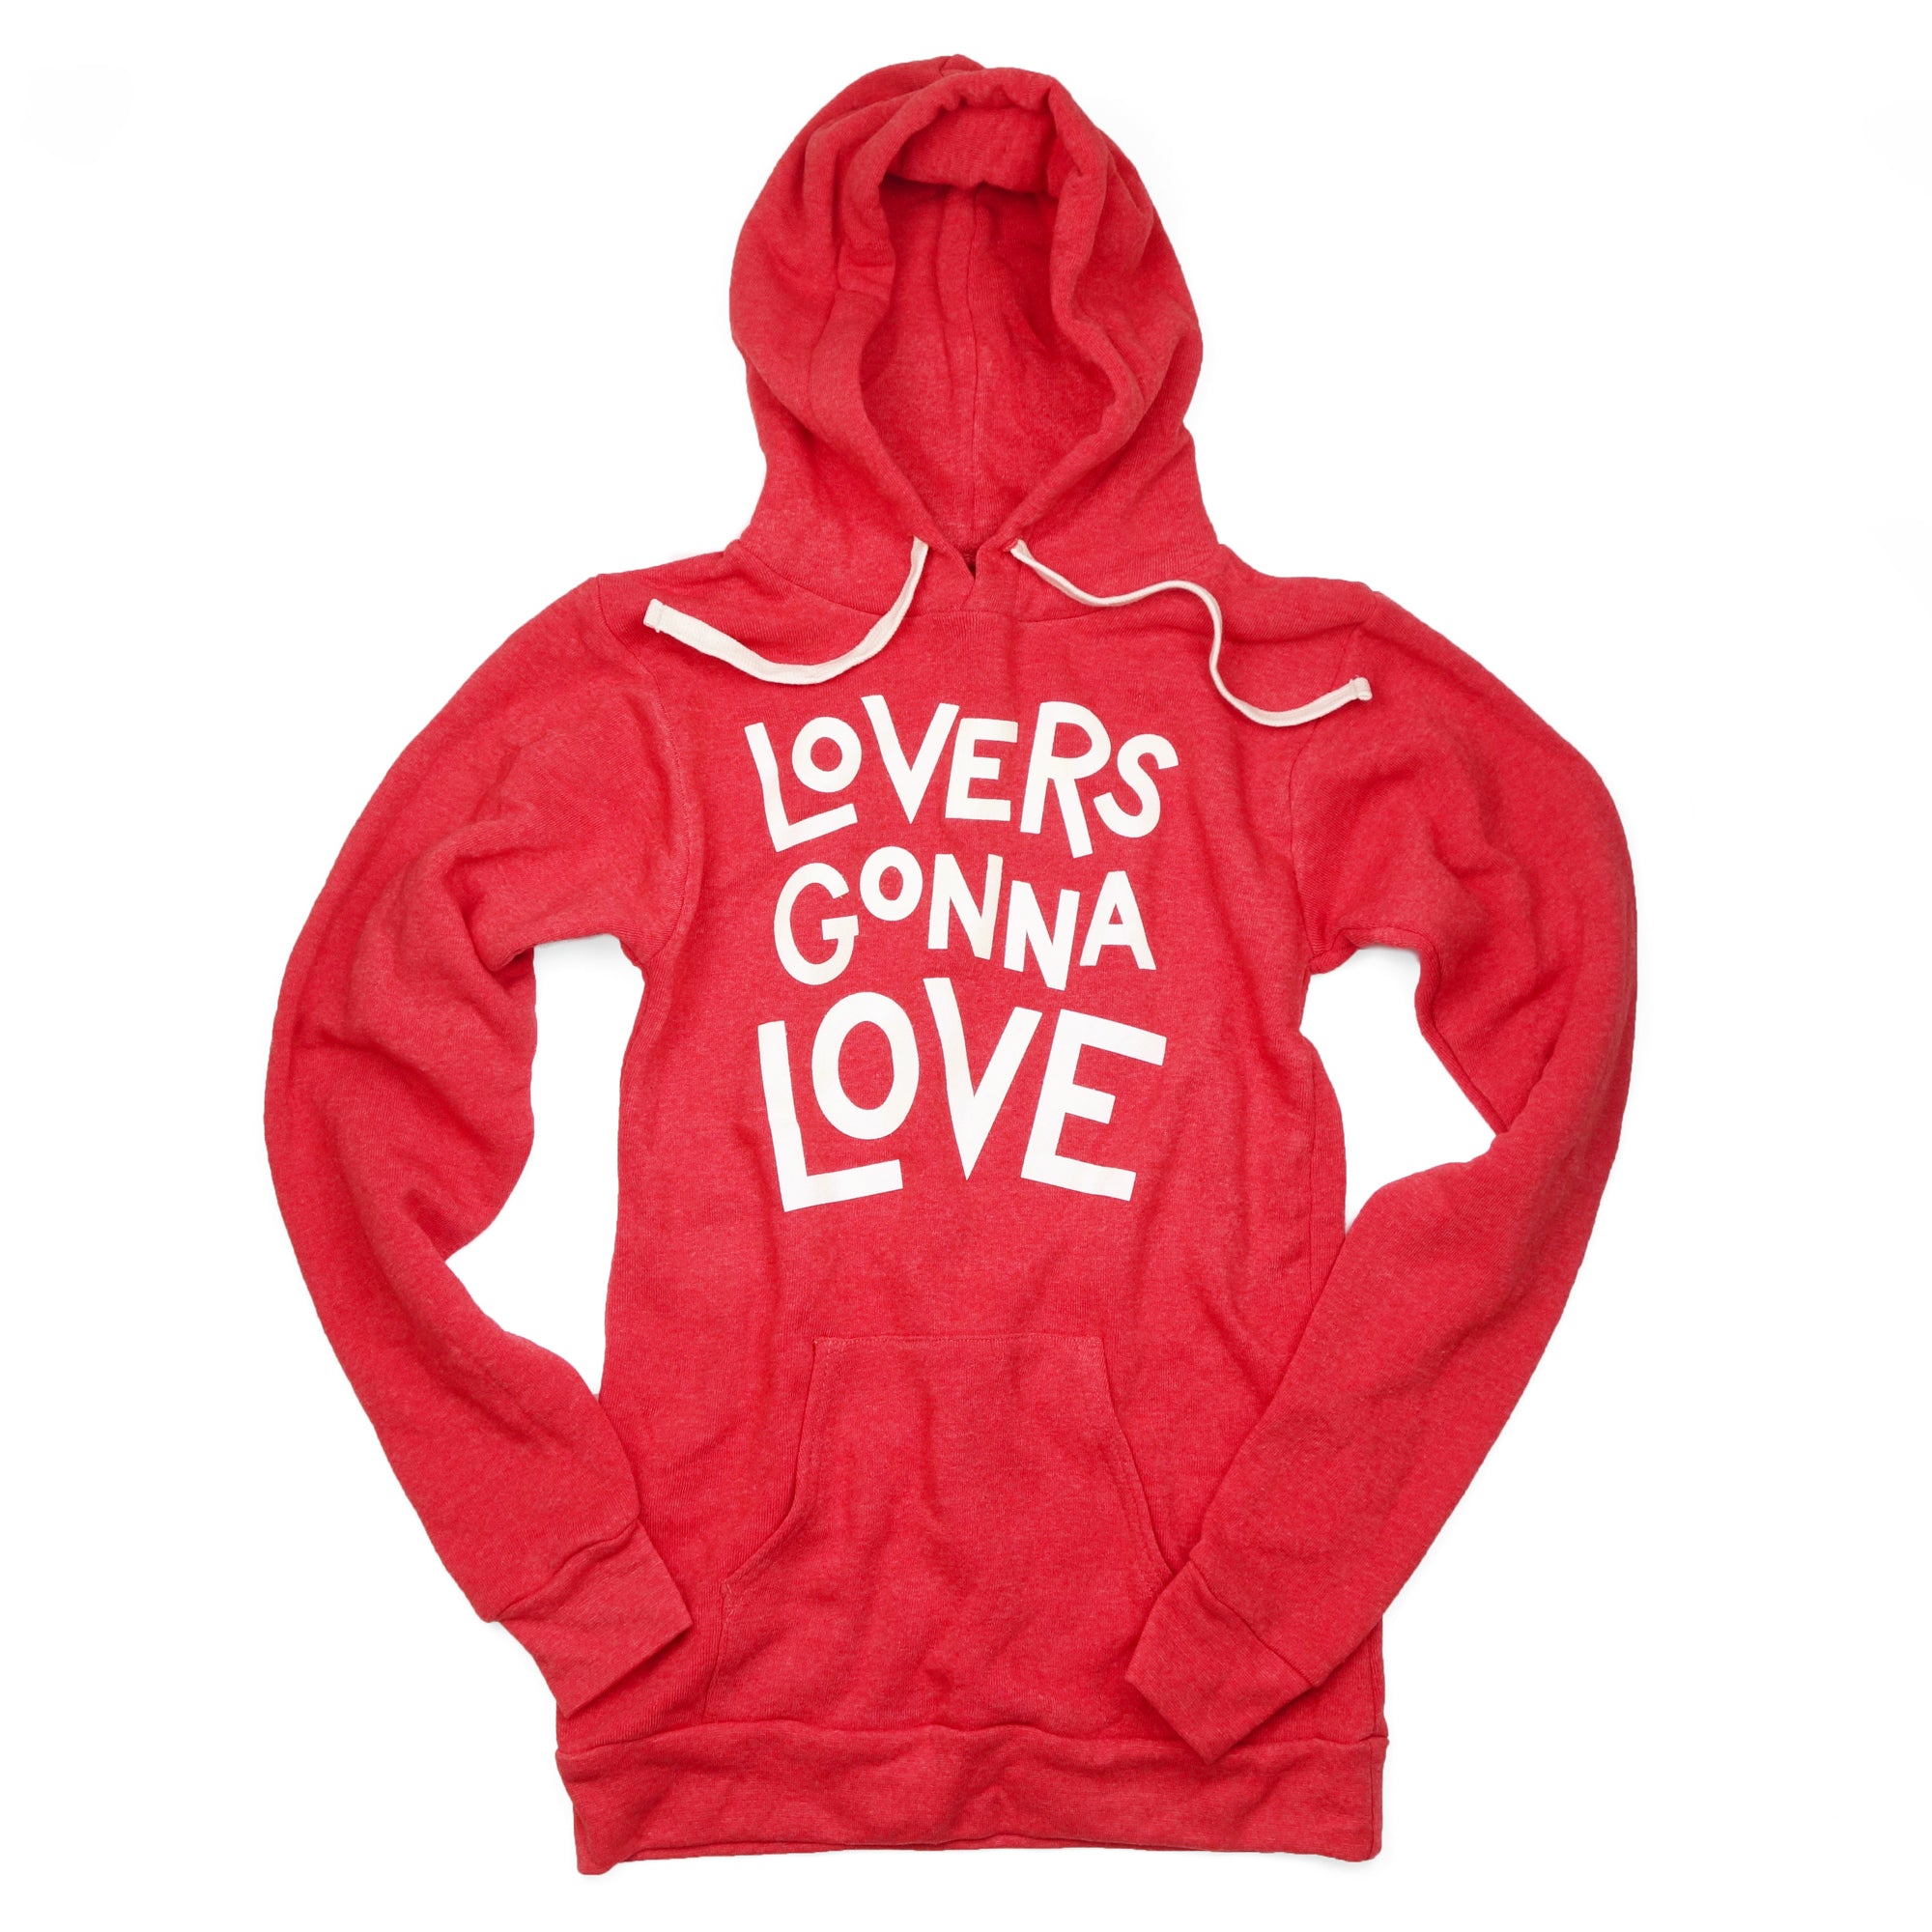 A red hooded sweatshirt with white letters reading "Lovers Gonna Love"